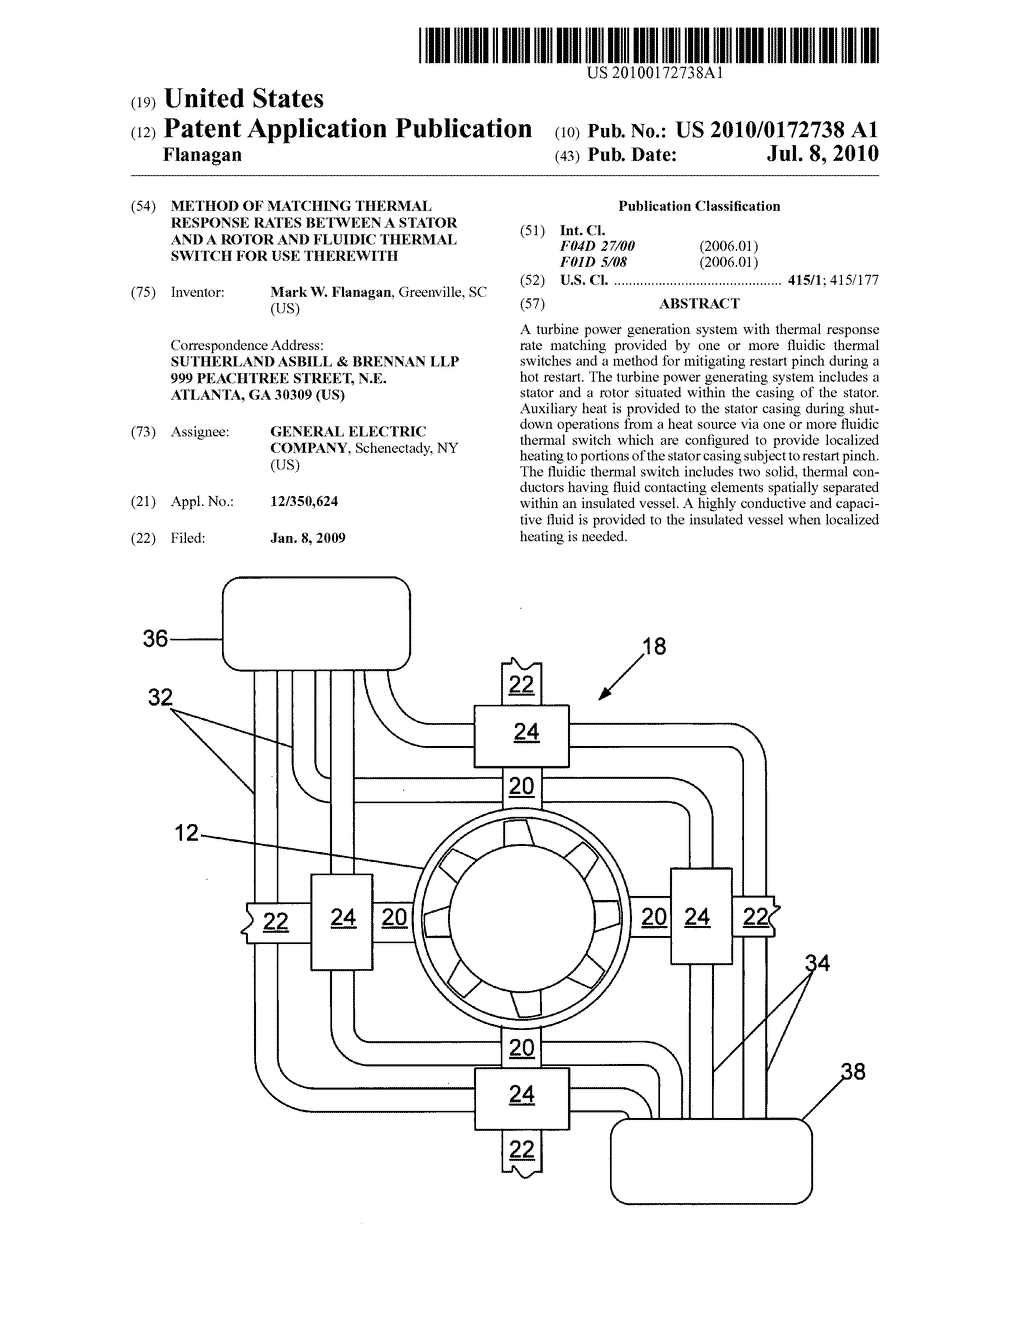 Method of Matching Thermal Response Rates Between A Stator and a Rotor and Fluidic Thermal Switch for Use Therewith - diagram, schematic, and image 01